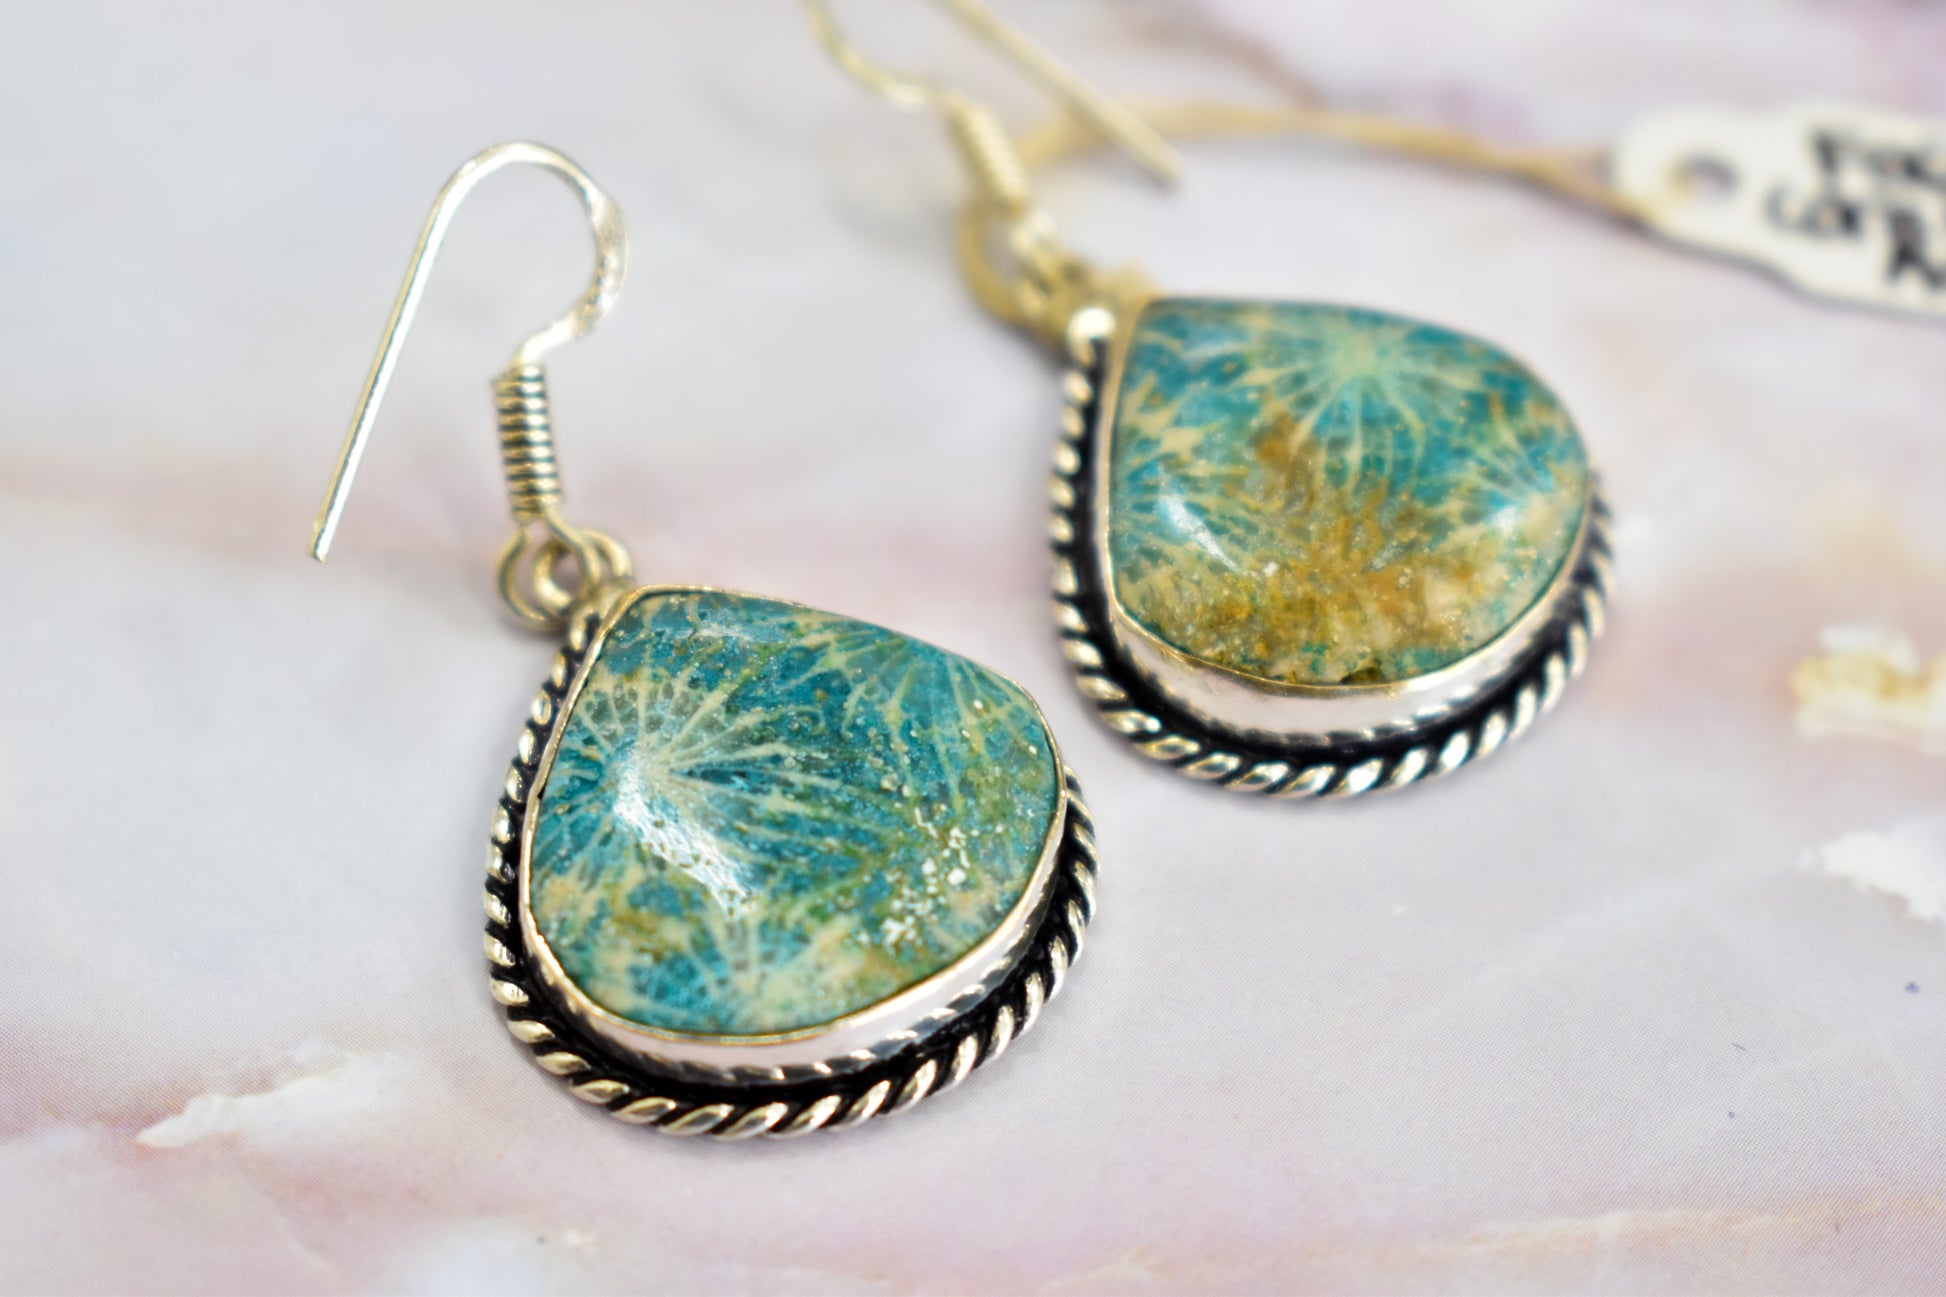 stones-of-transformation - Fossil Coral Agate Earrings - Stones of Transformation - 